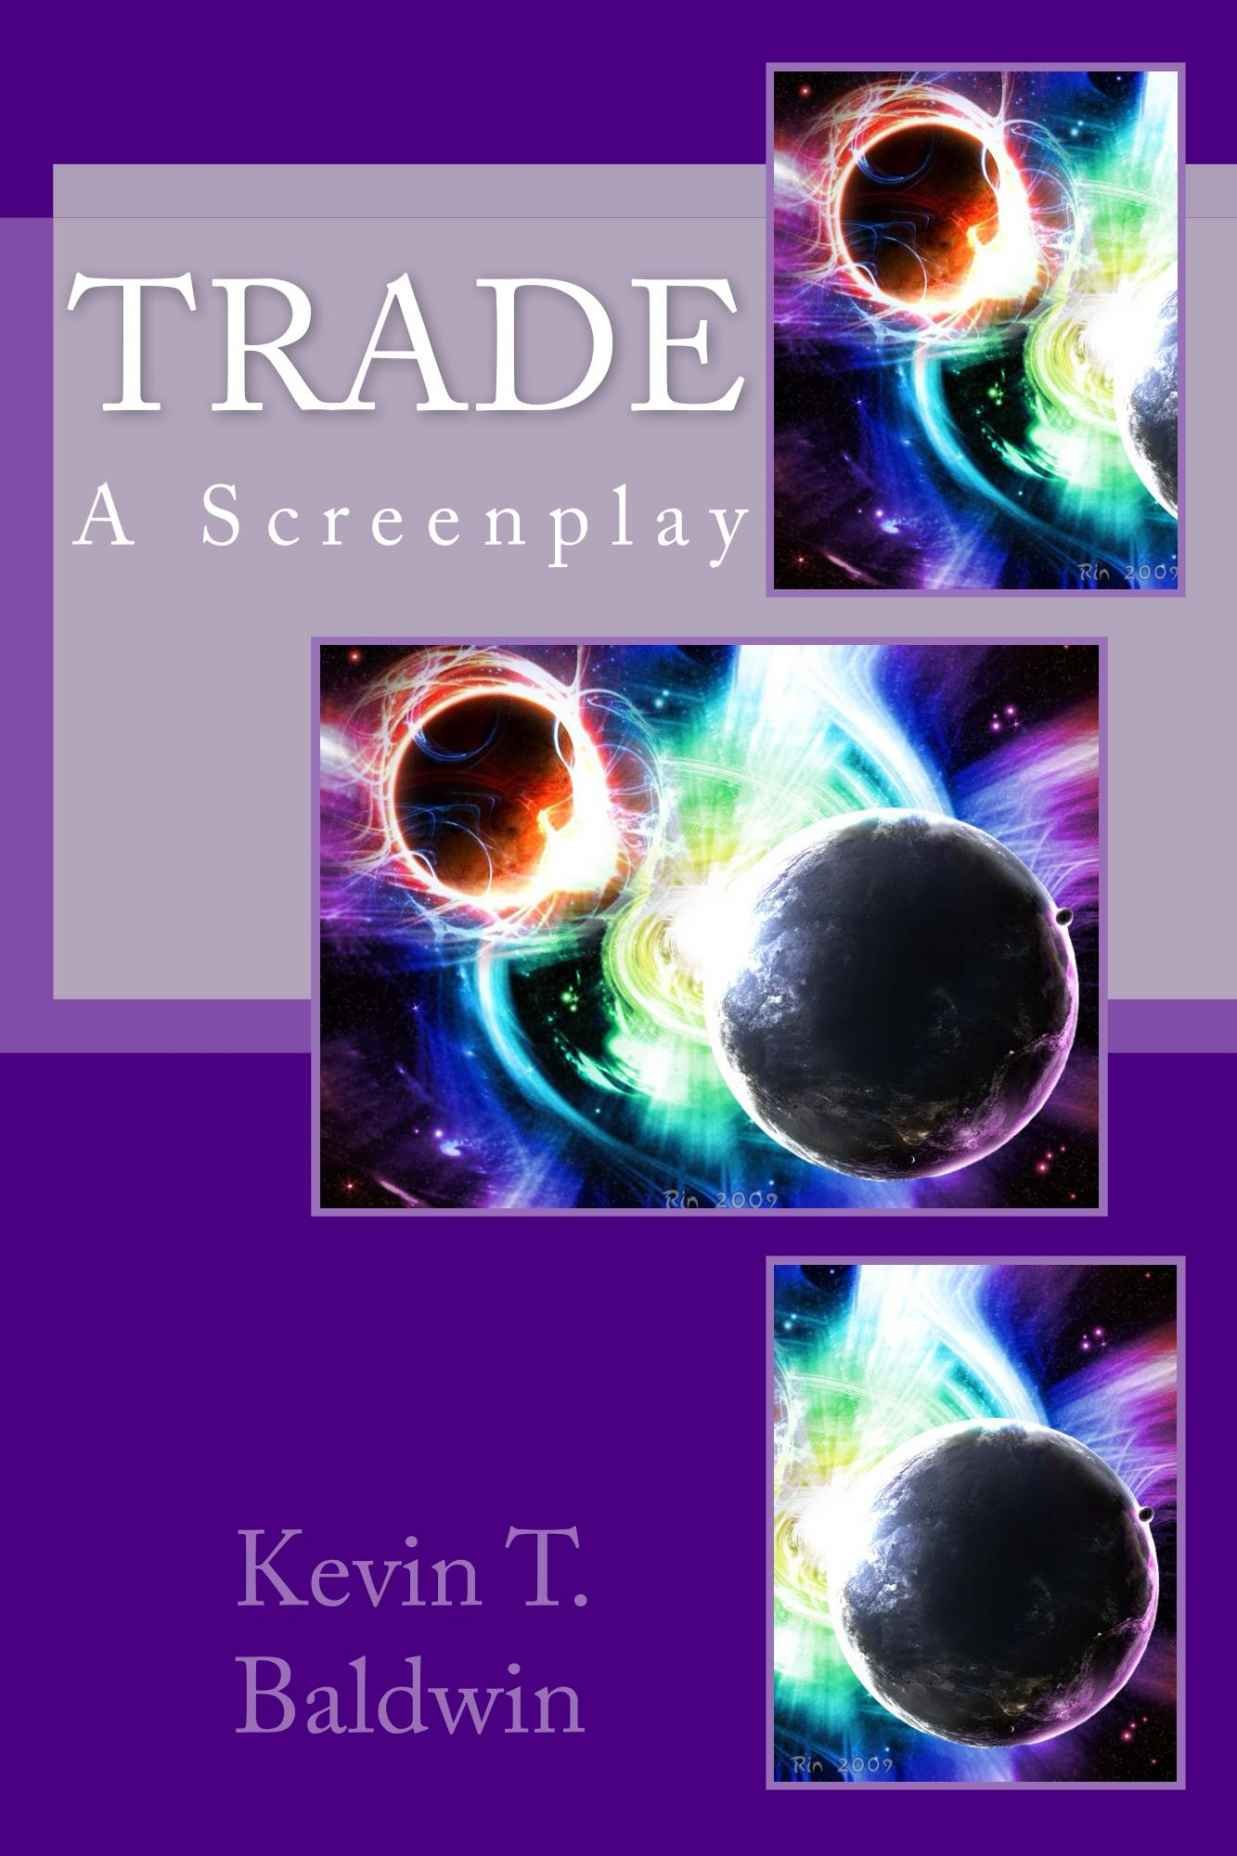 "Trade - A Time Travel Odyssey Screenplay"